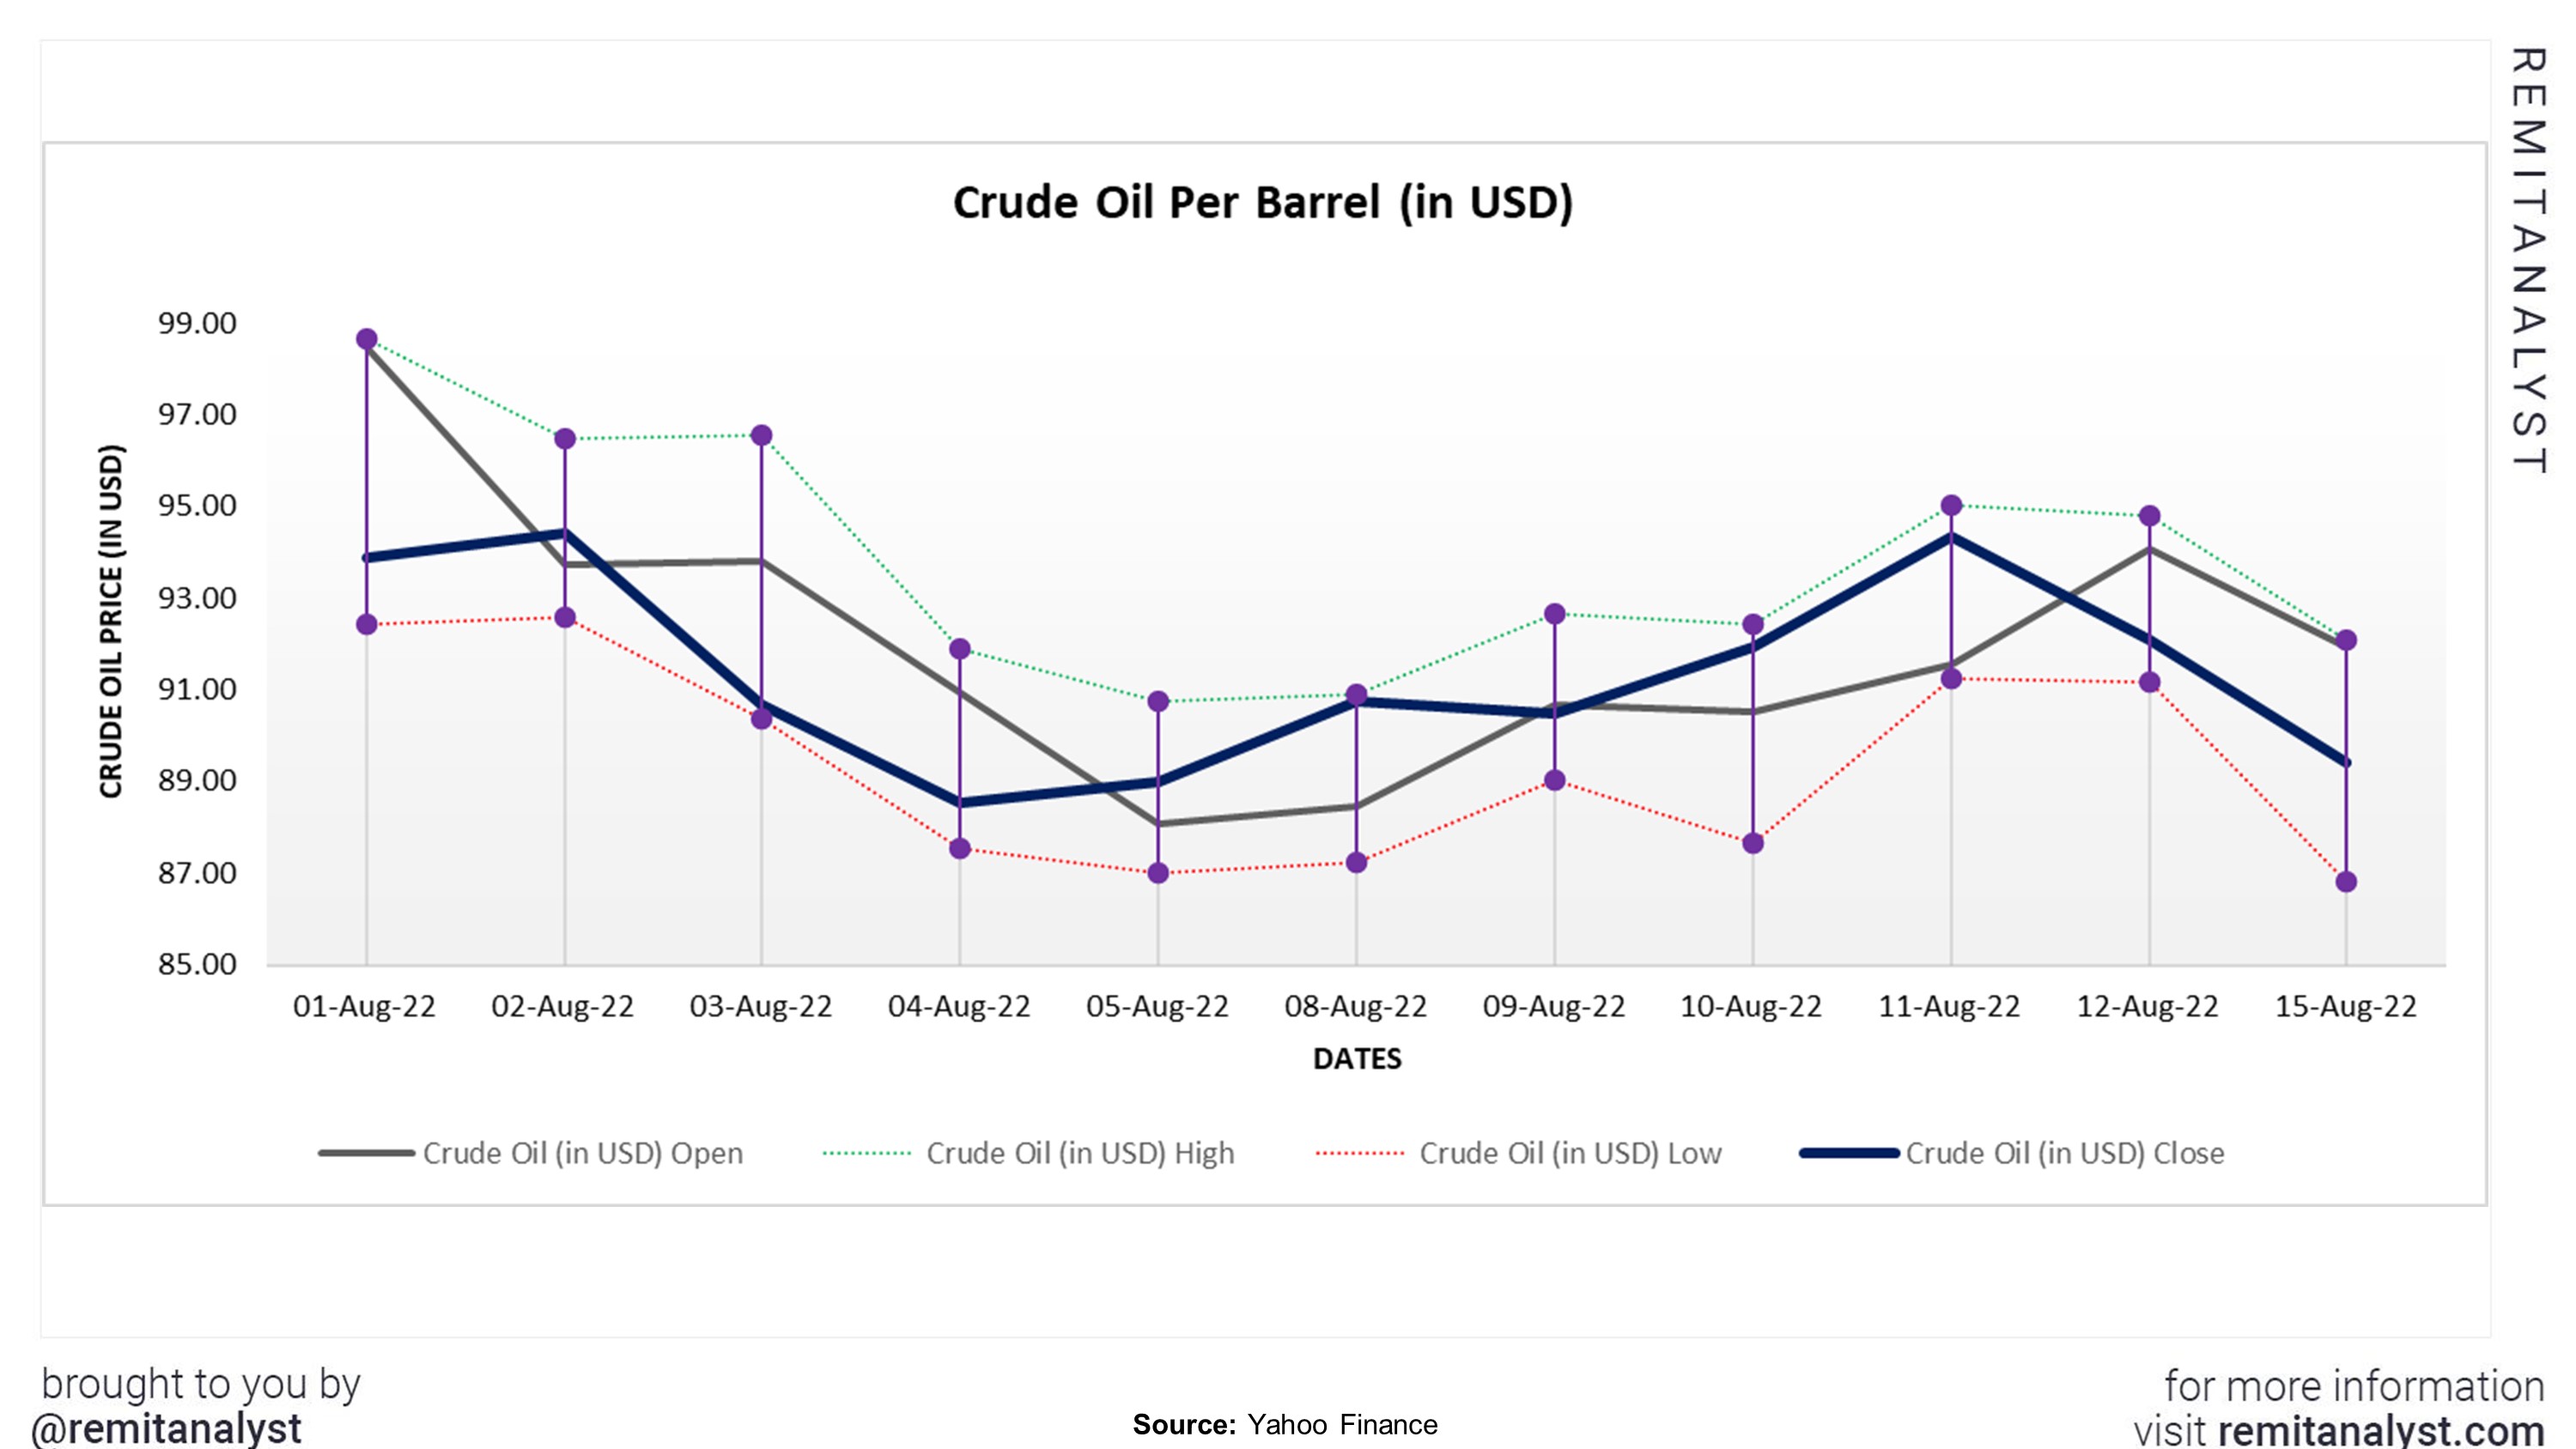 Crude_Oil_Prices_from_08-01-2022_to_08-15-2022.jpg